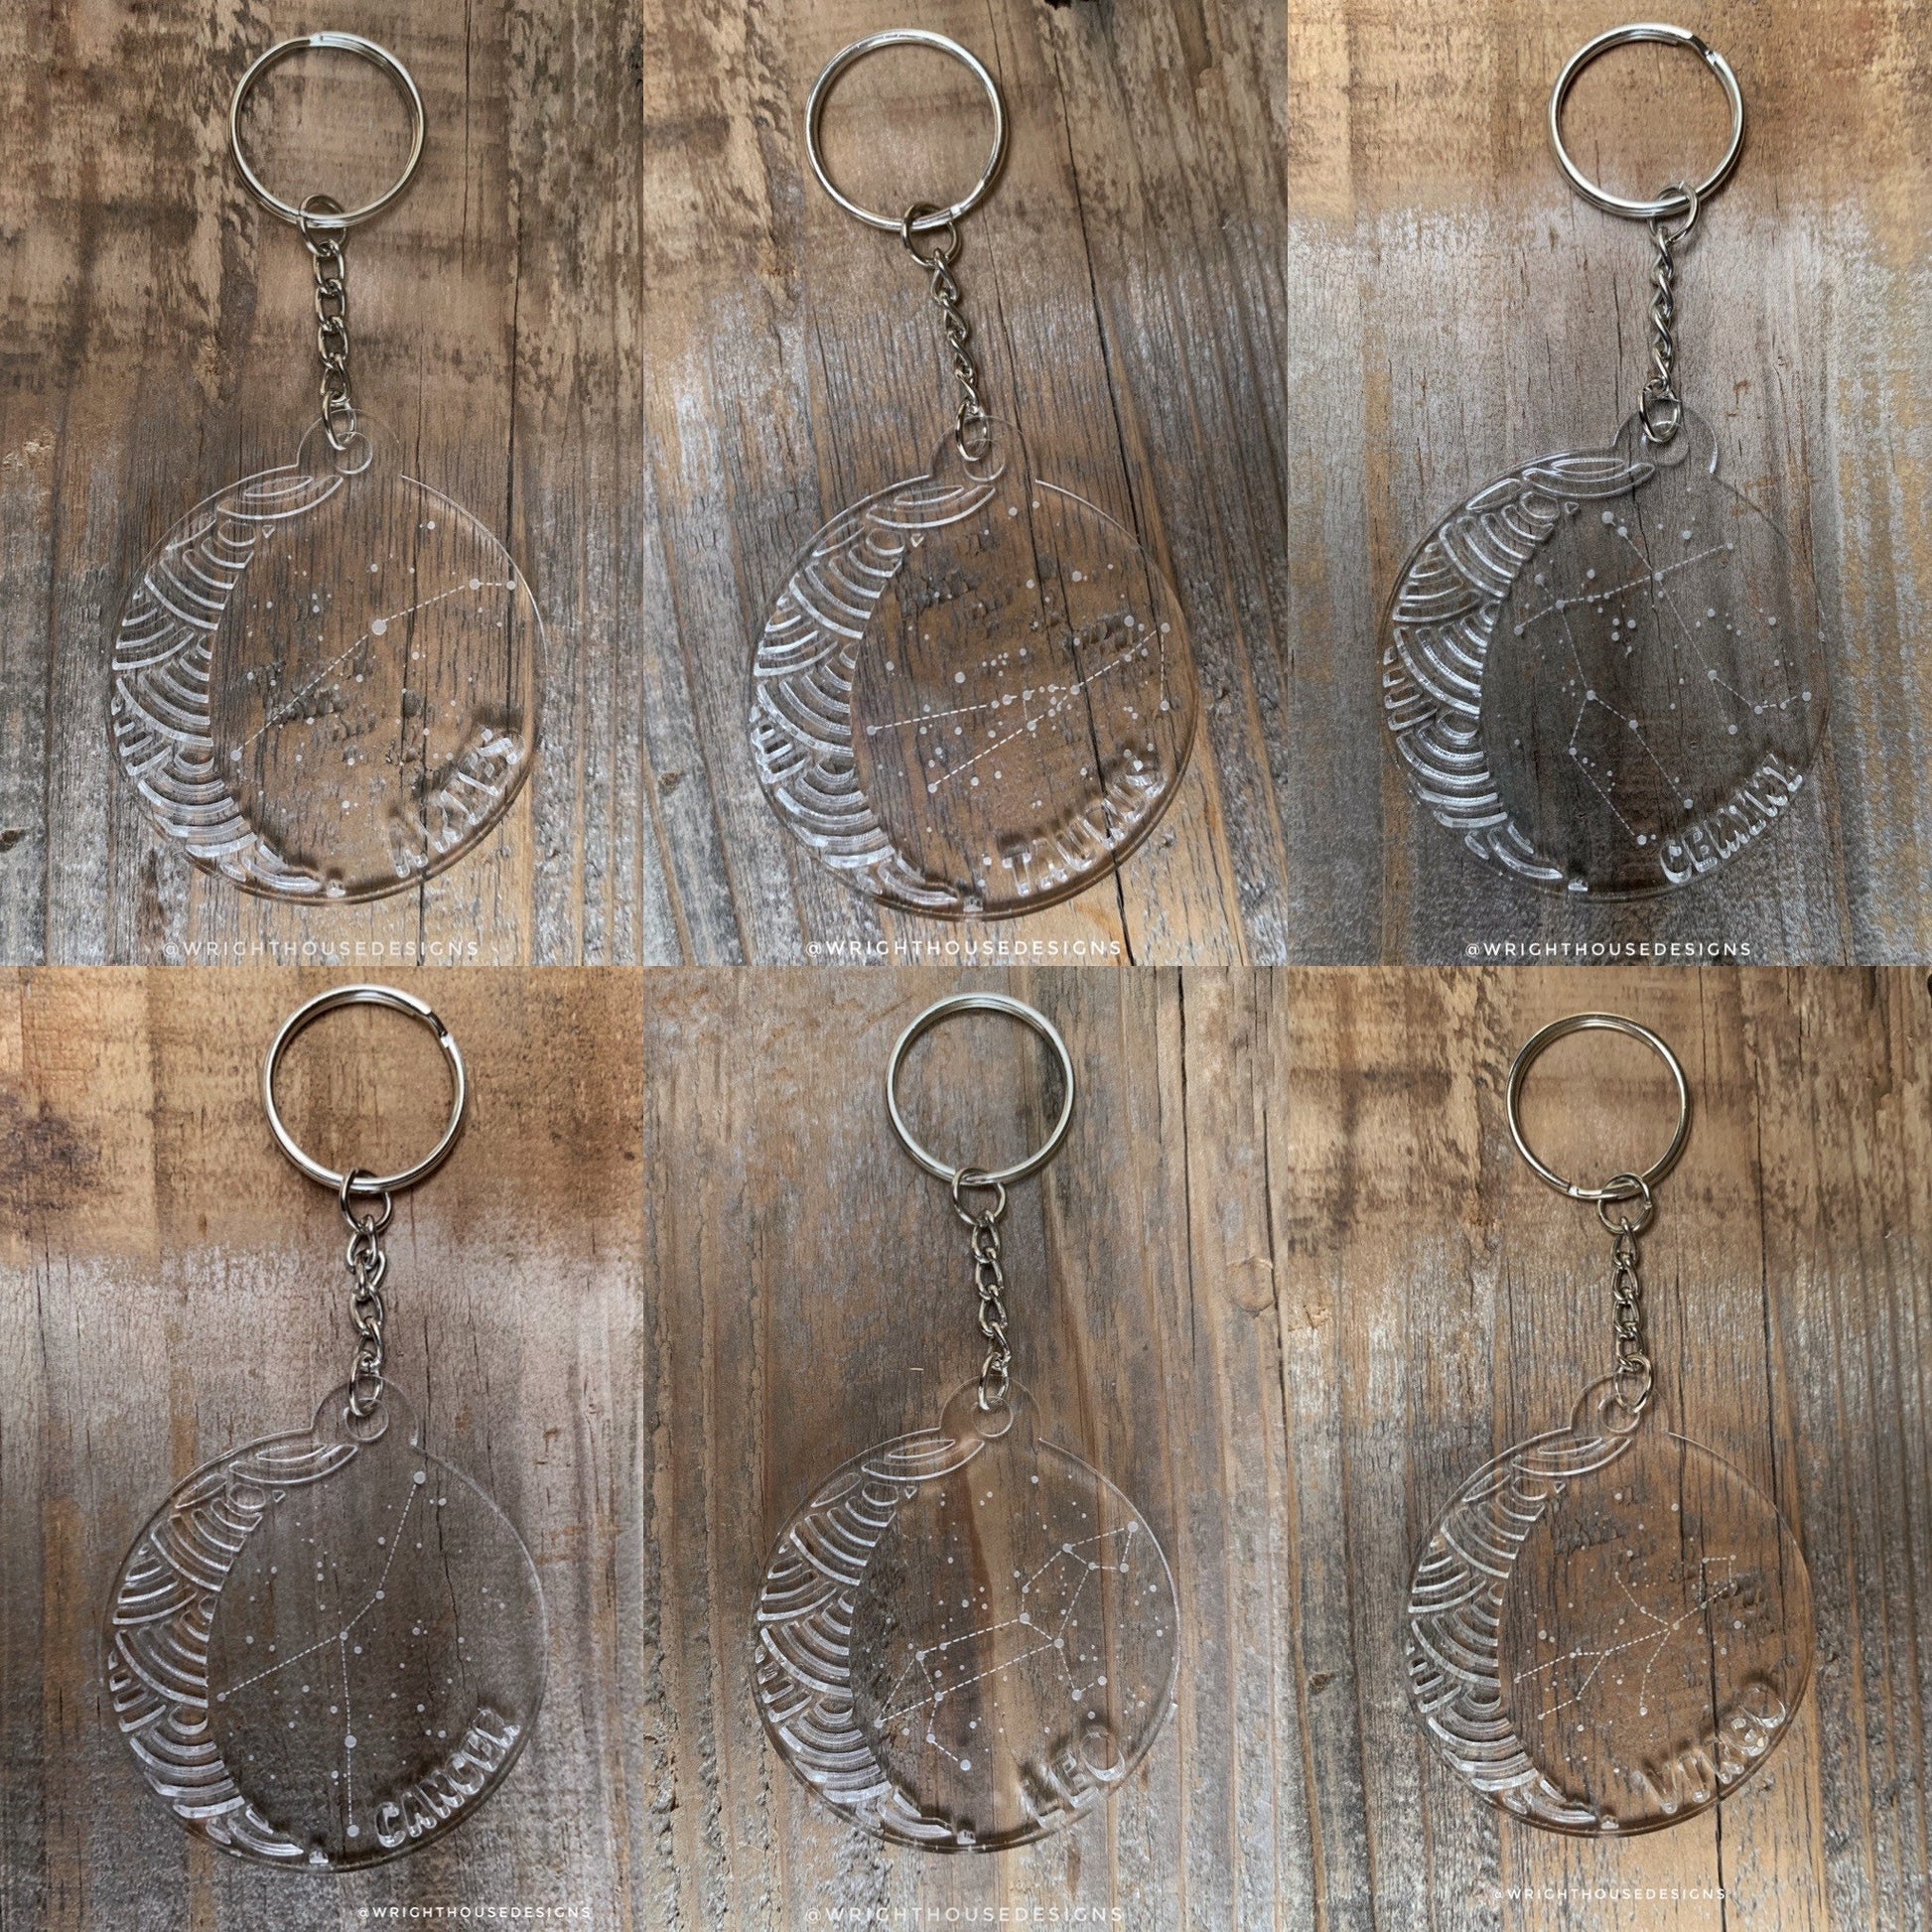 Laser Engraved Astrological Zodiac Acrylic Keychain - Constellation Star Sign Key Ring - Laser Cut Moon and Star - Personalized Novelty Gift